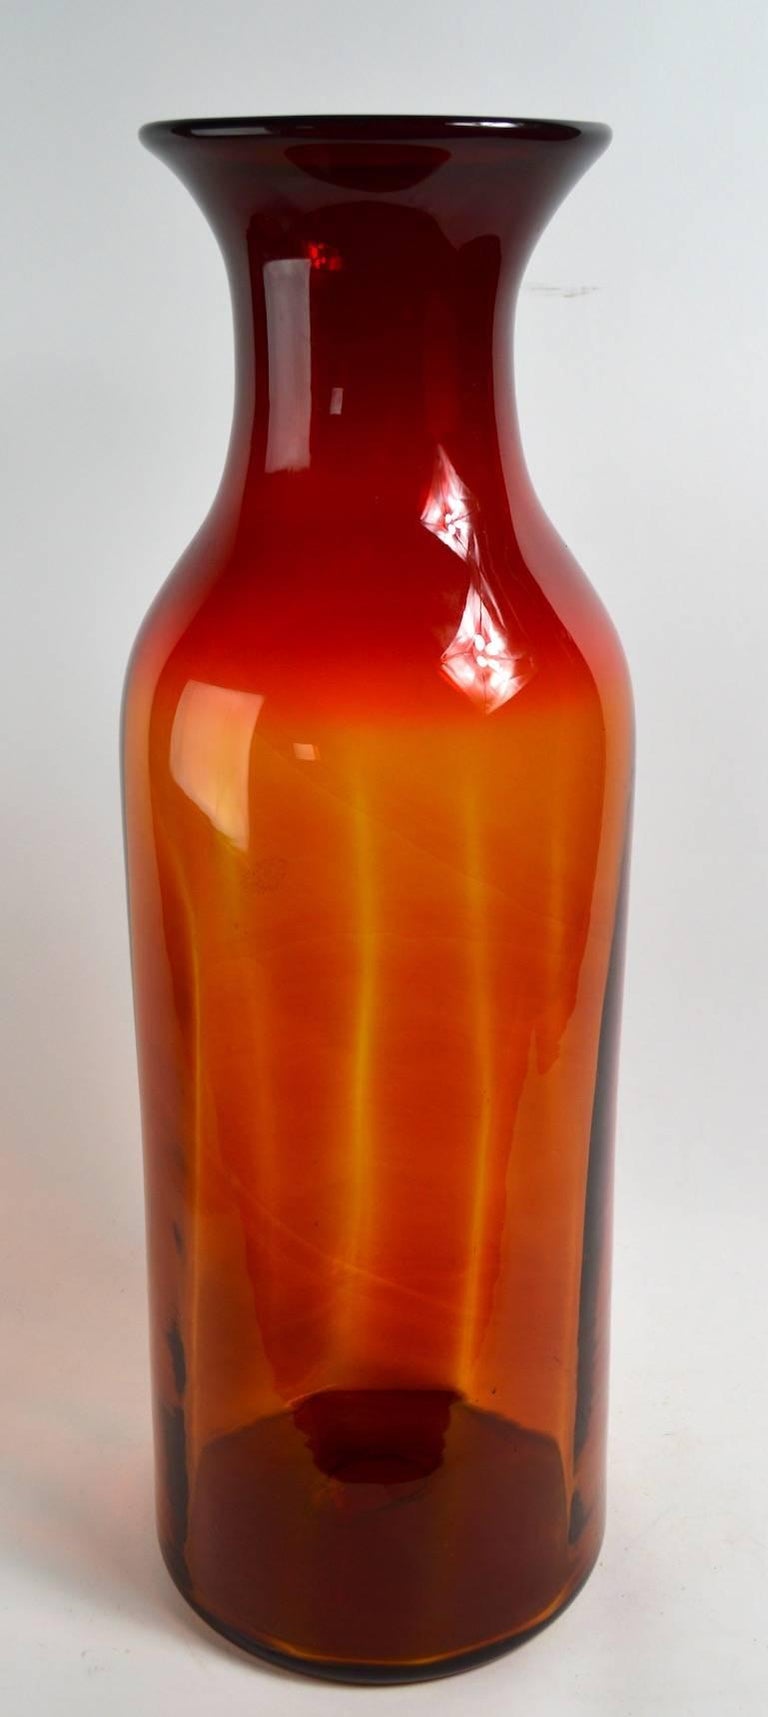 Large, glass vase attributed to Blenko, red to orange color gradation. Fine original condition, free of damage.